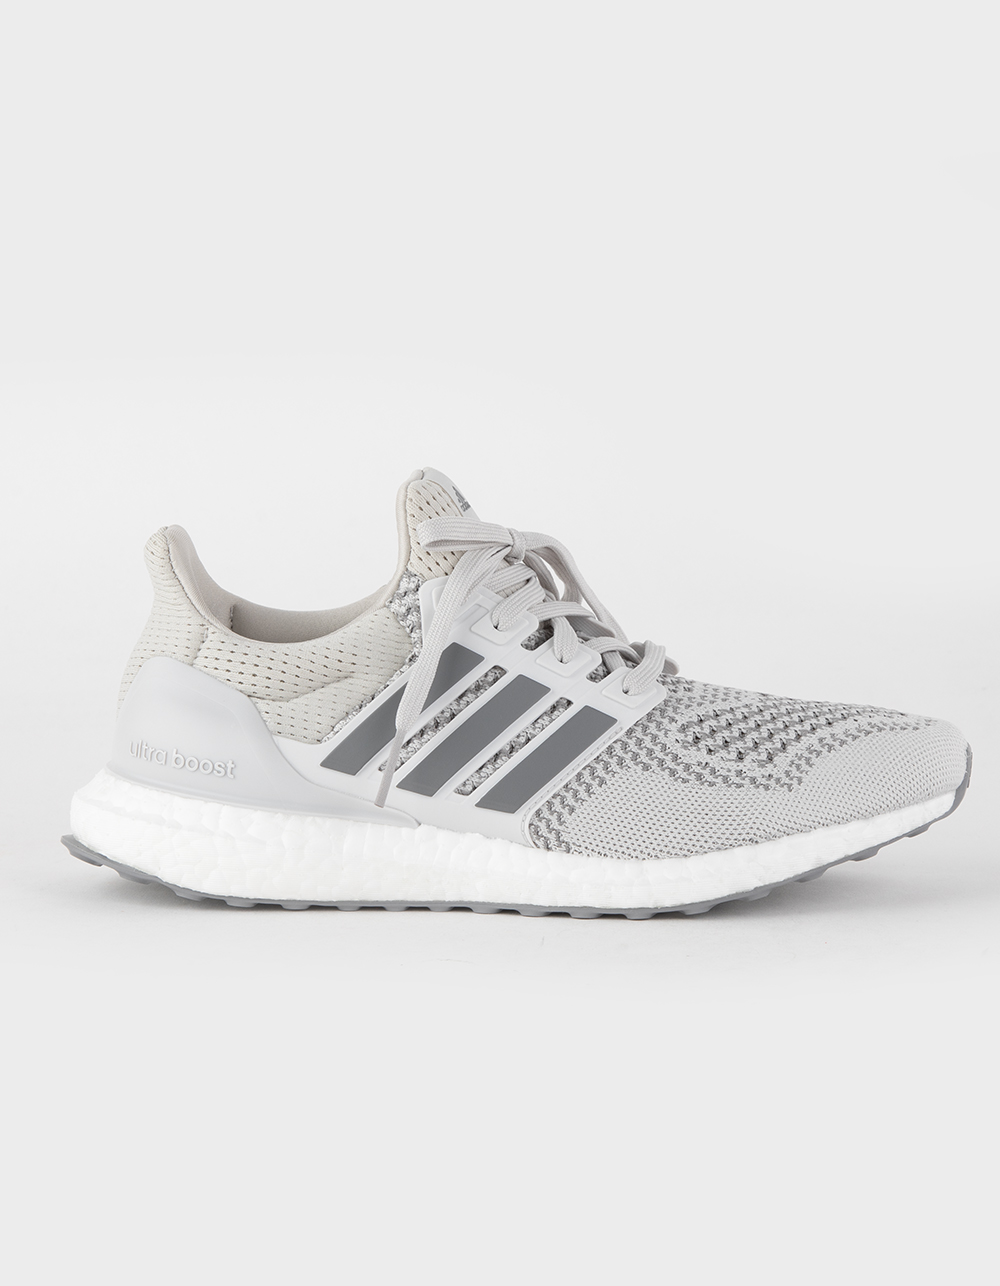 adidas Ultraboost 1.0 Shoes - Grey, Women's Lifestyle